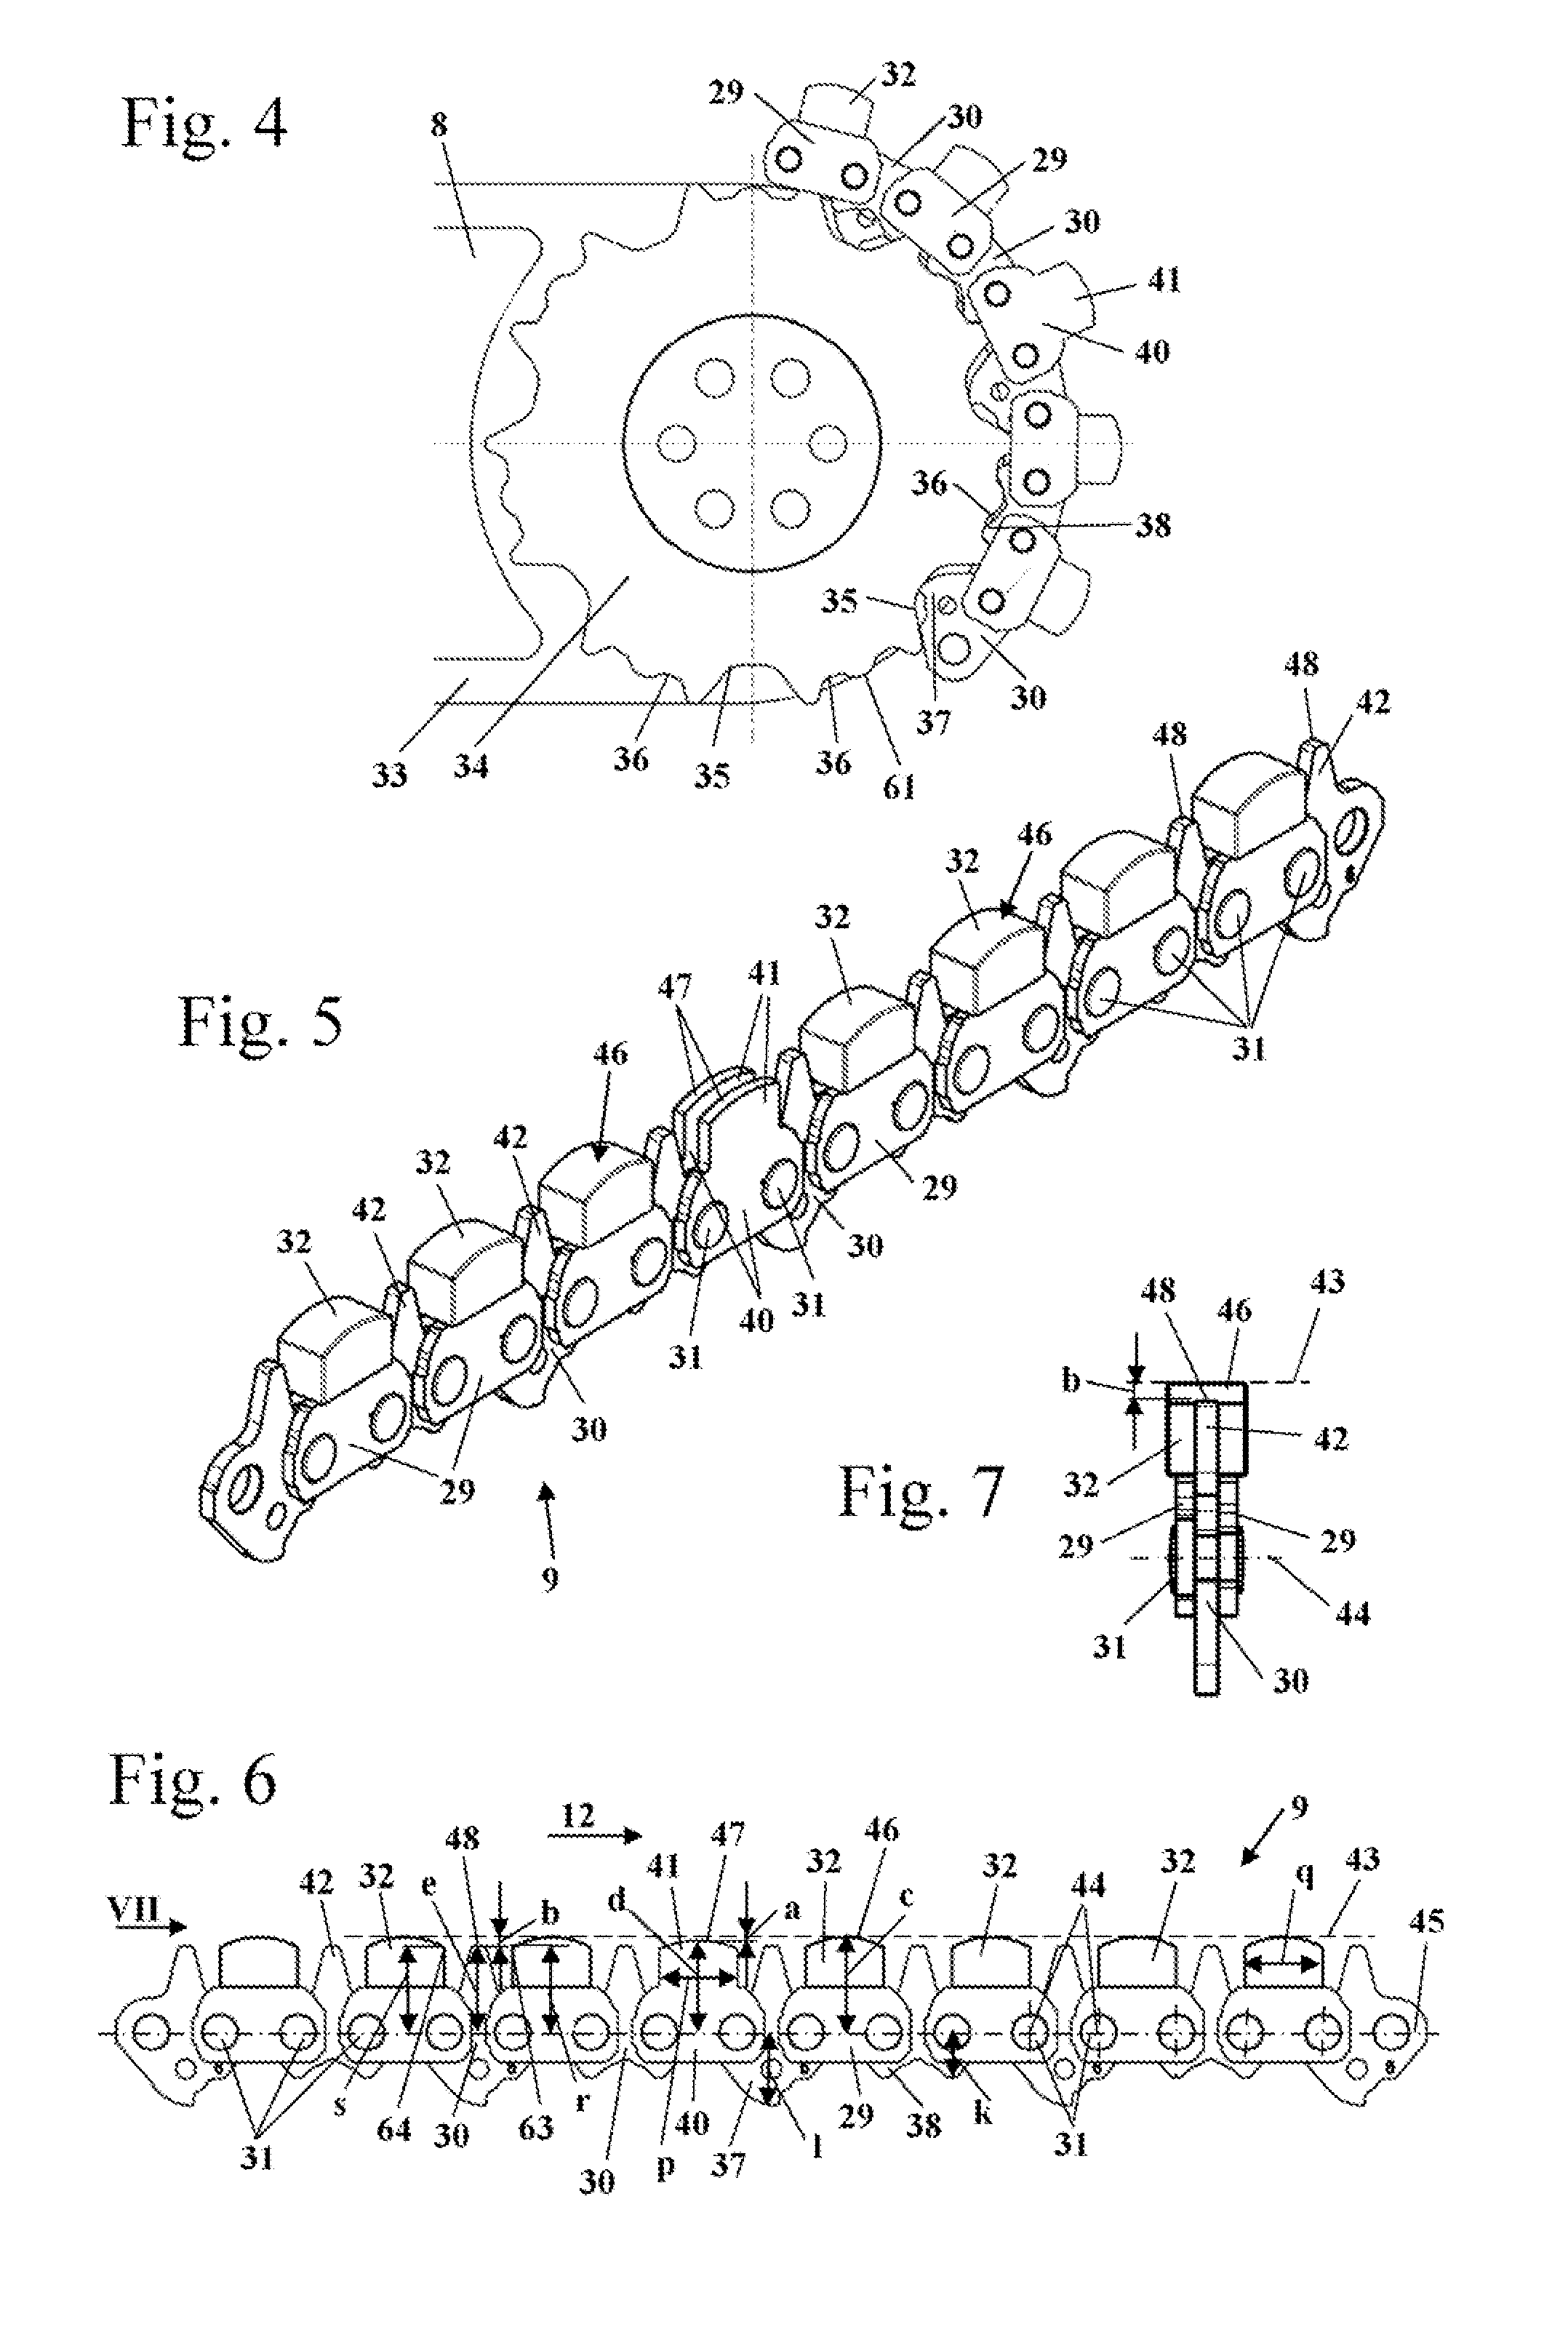 Cutting chain for cutting mineral and metal materials